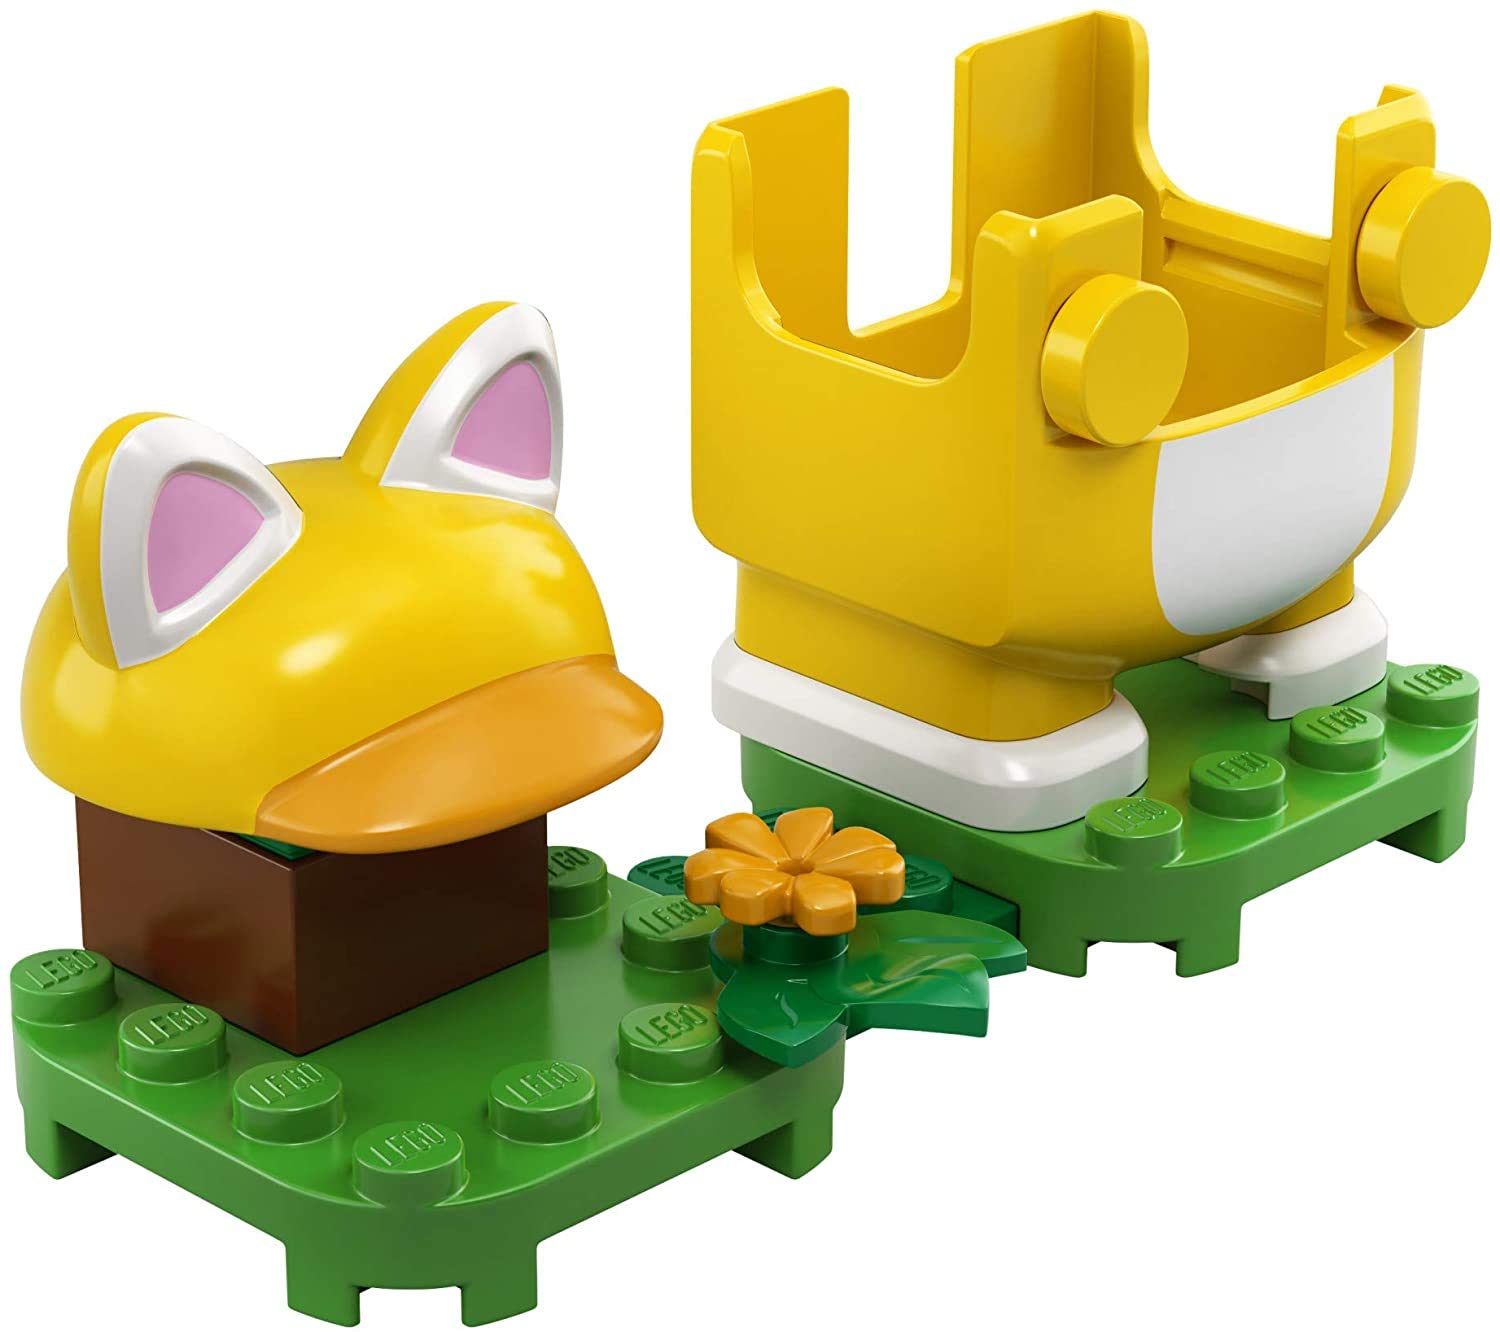 LEGO Super Mario Cat Mario Power-Up Pack 71372 Building Kit, Cool Toy for Kids to Power Up The Mario Figure in The Adventures with Mario Starter Course (71360) Playset (11 Pieces)